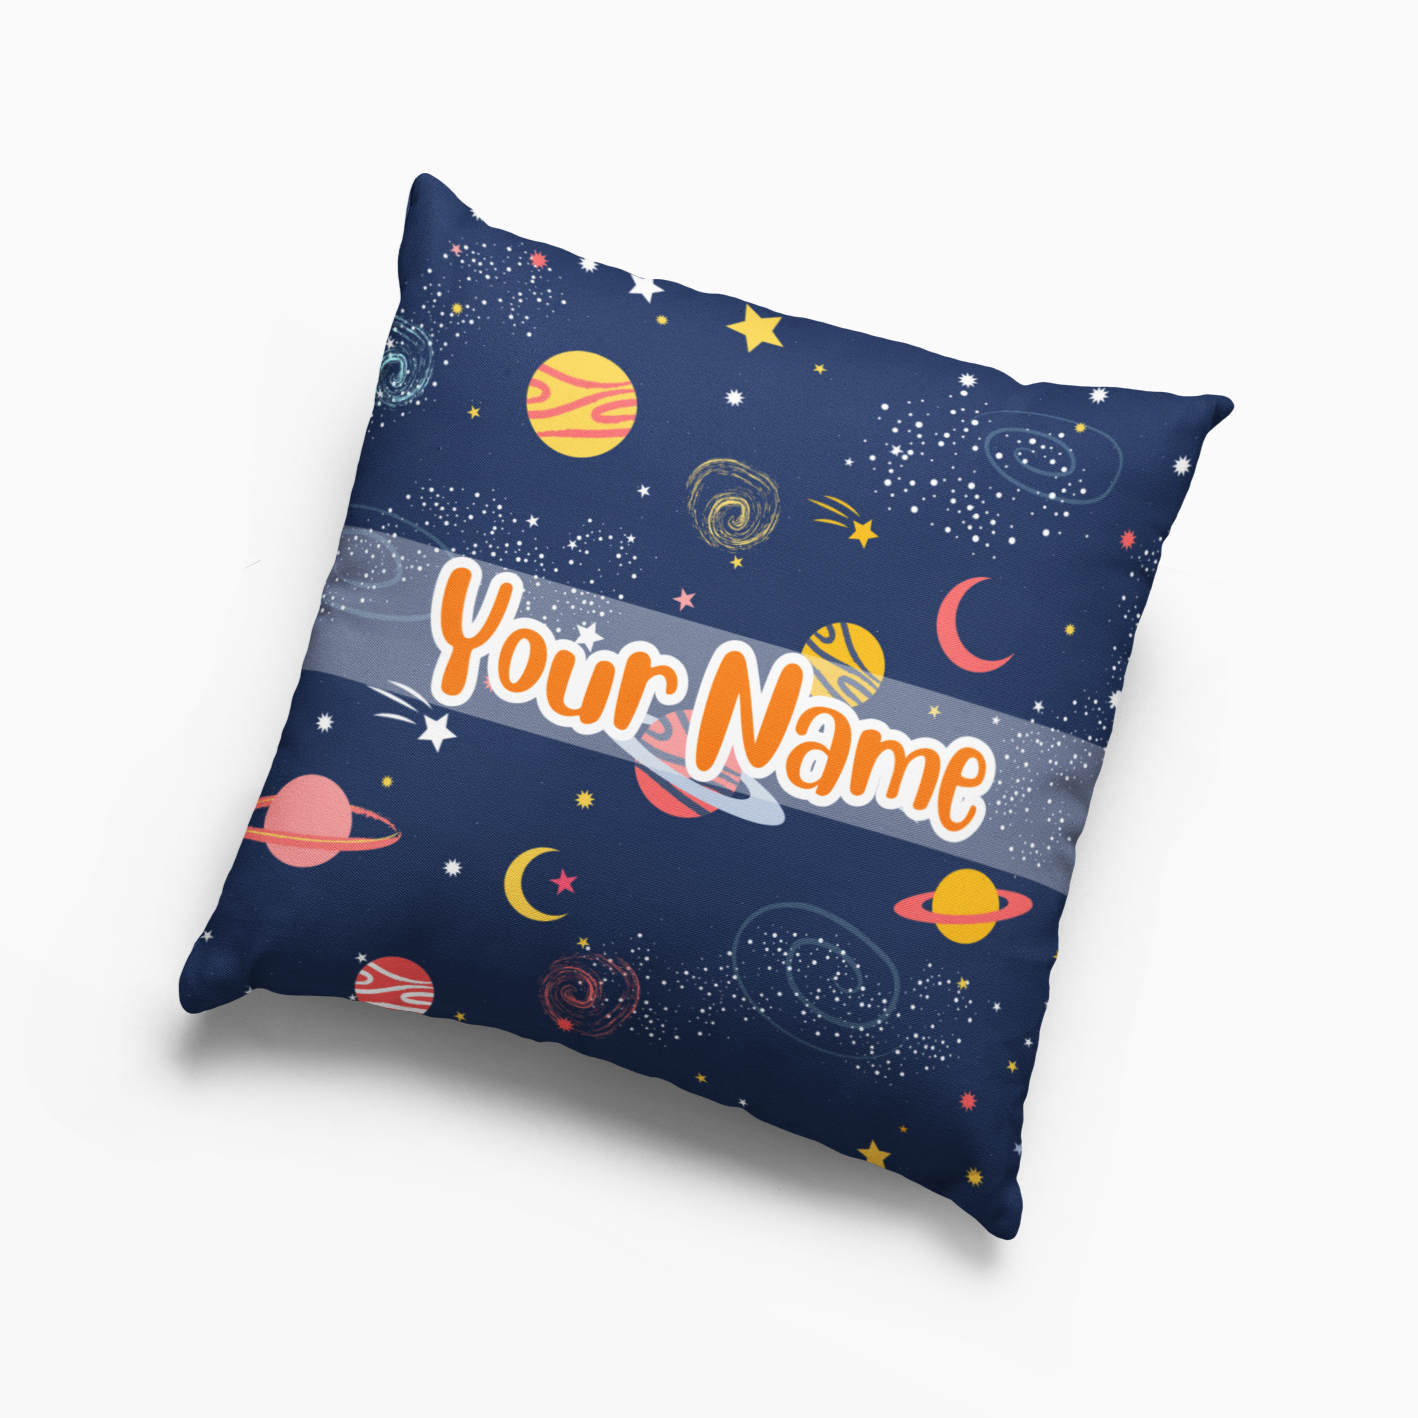 Funny Space Pillow personalized Pillow with Your name #1 Pillow Case